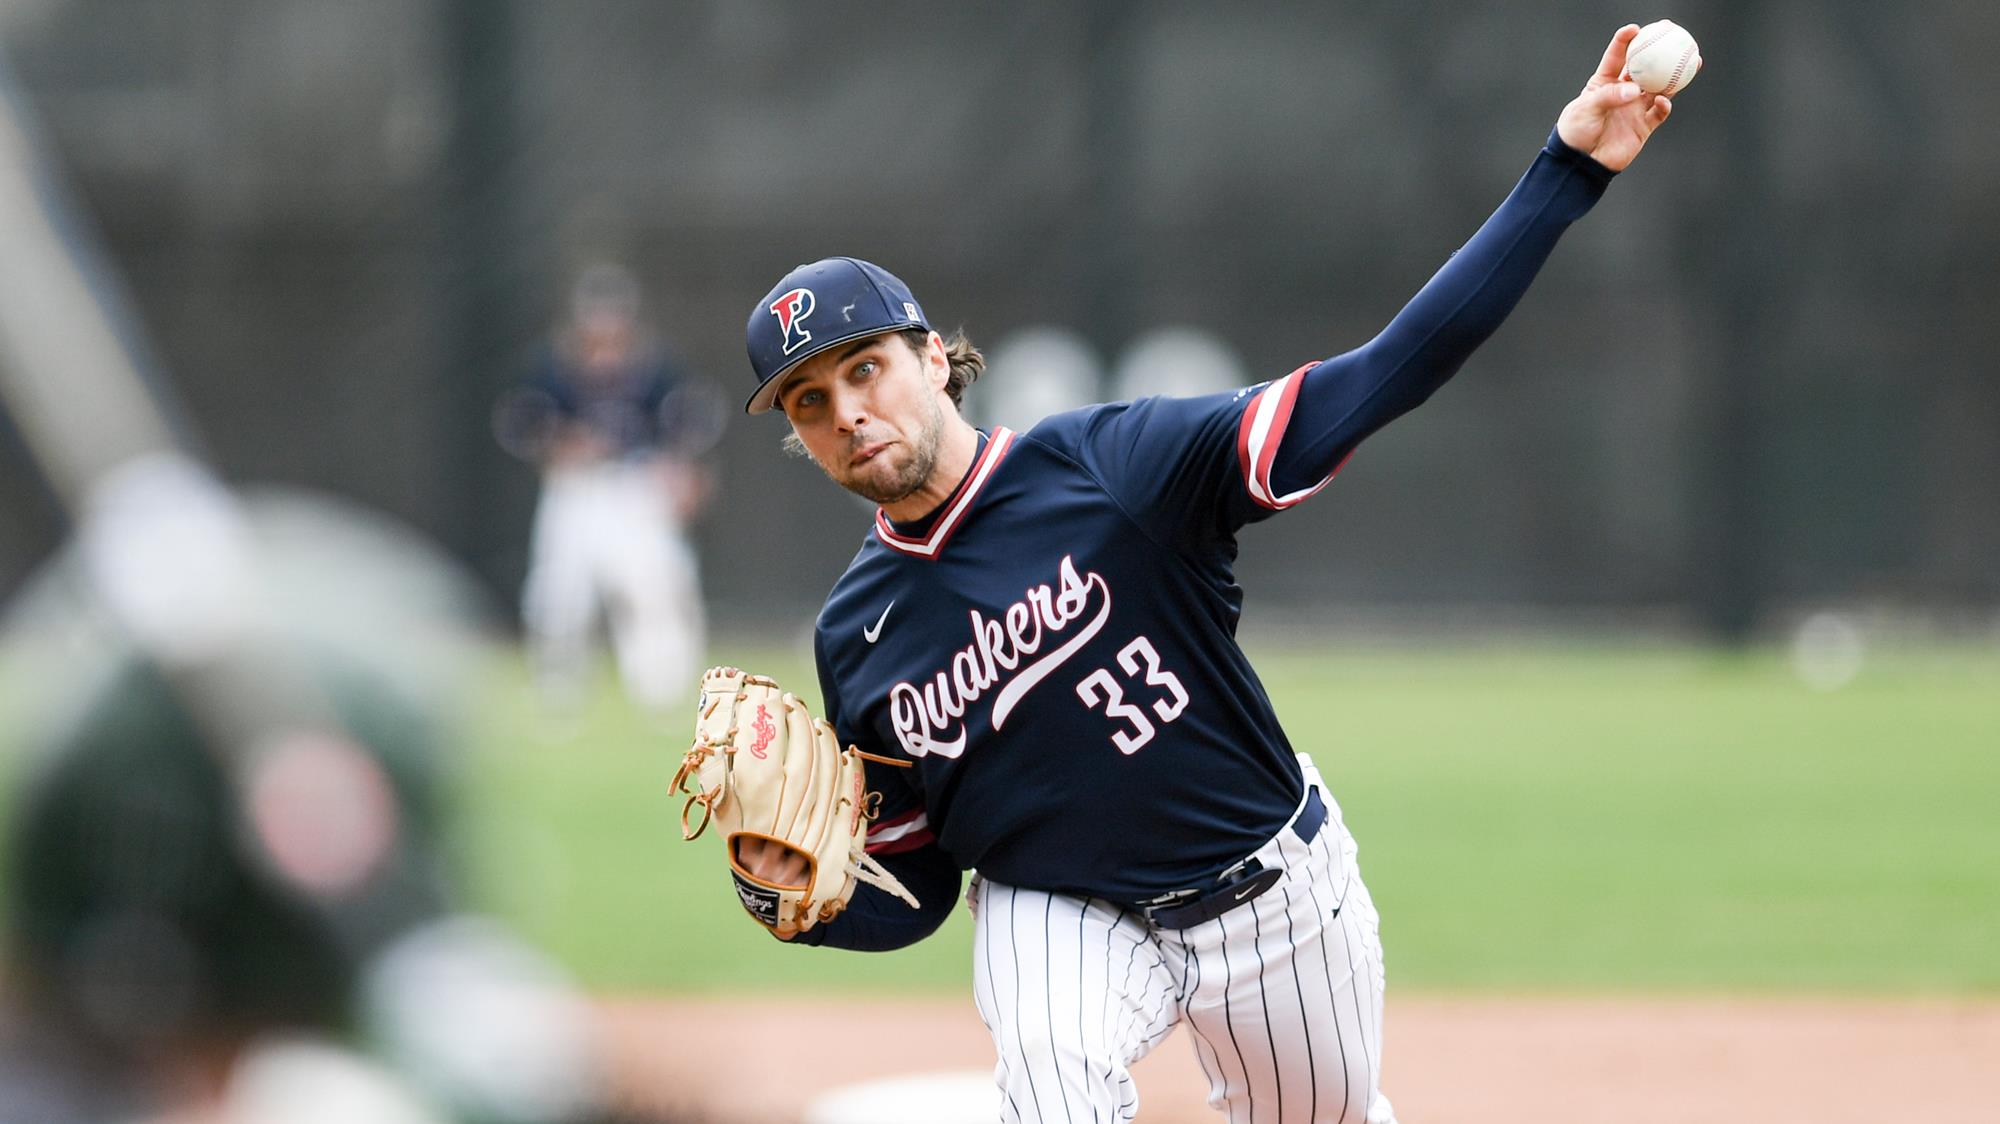 Miller in the process of throwing a pitch during his Penn days.